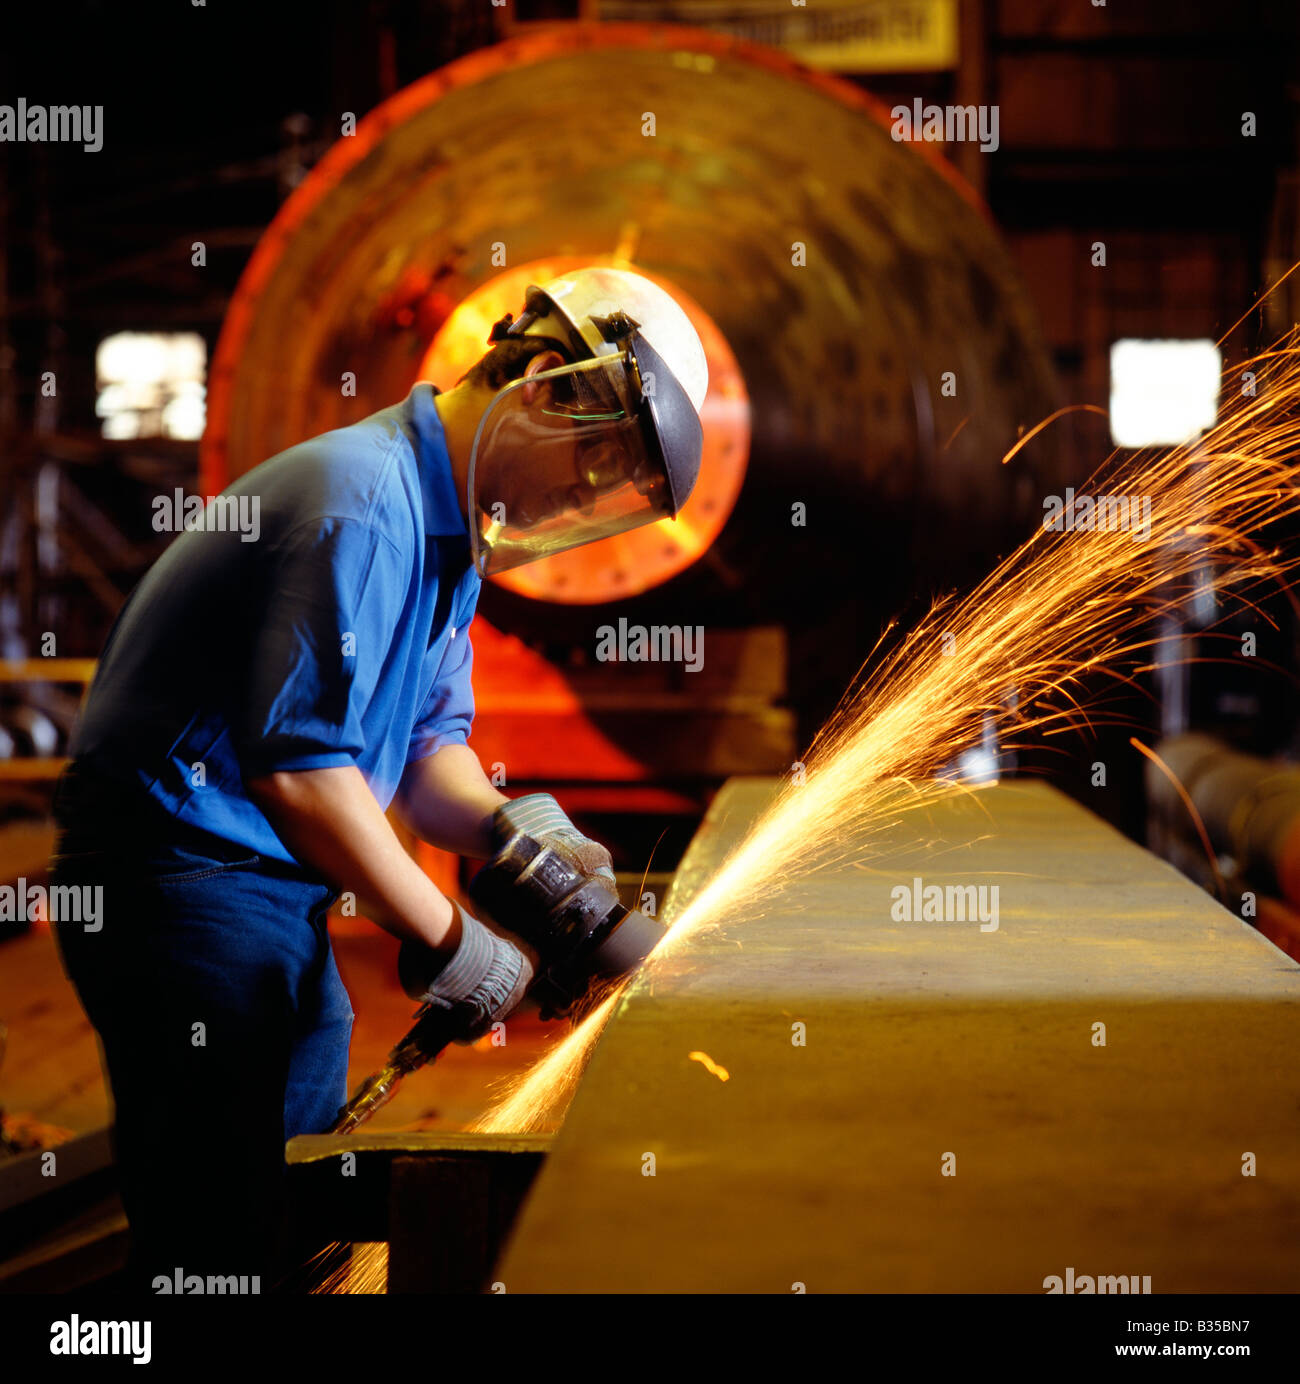 Steel worker grinding metal in a fabrication plant Stock Photo